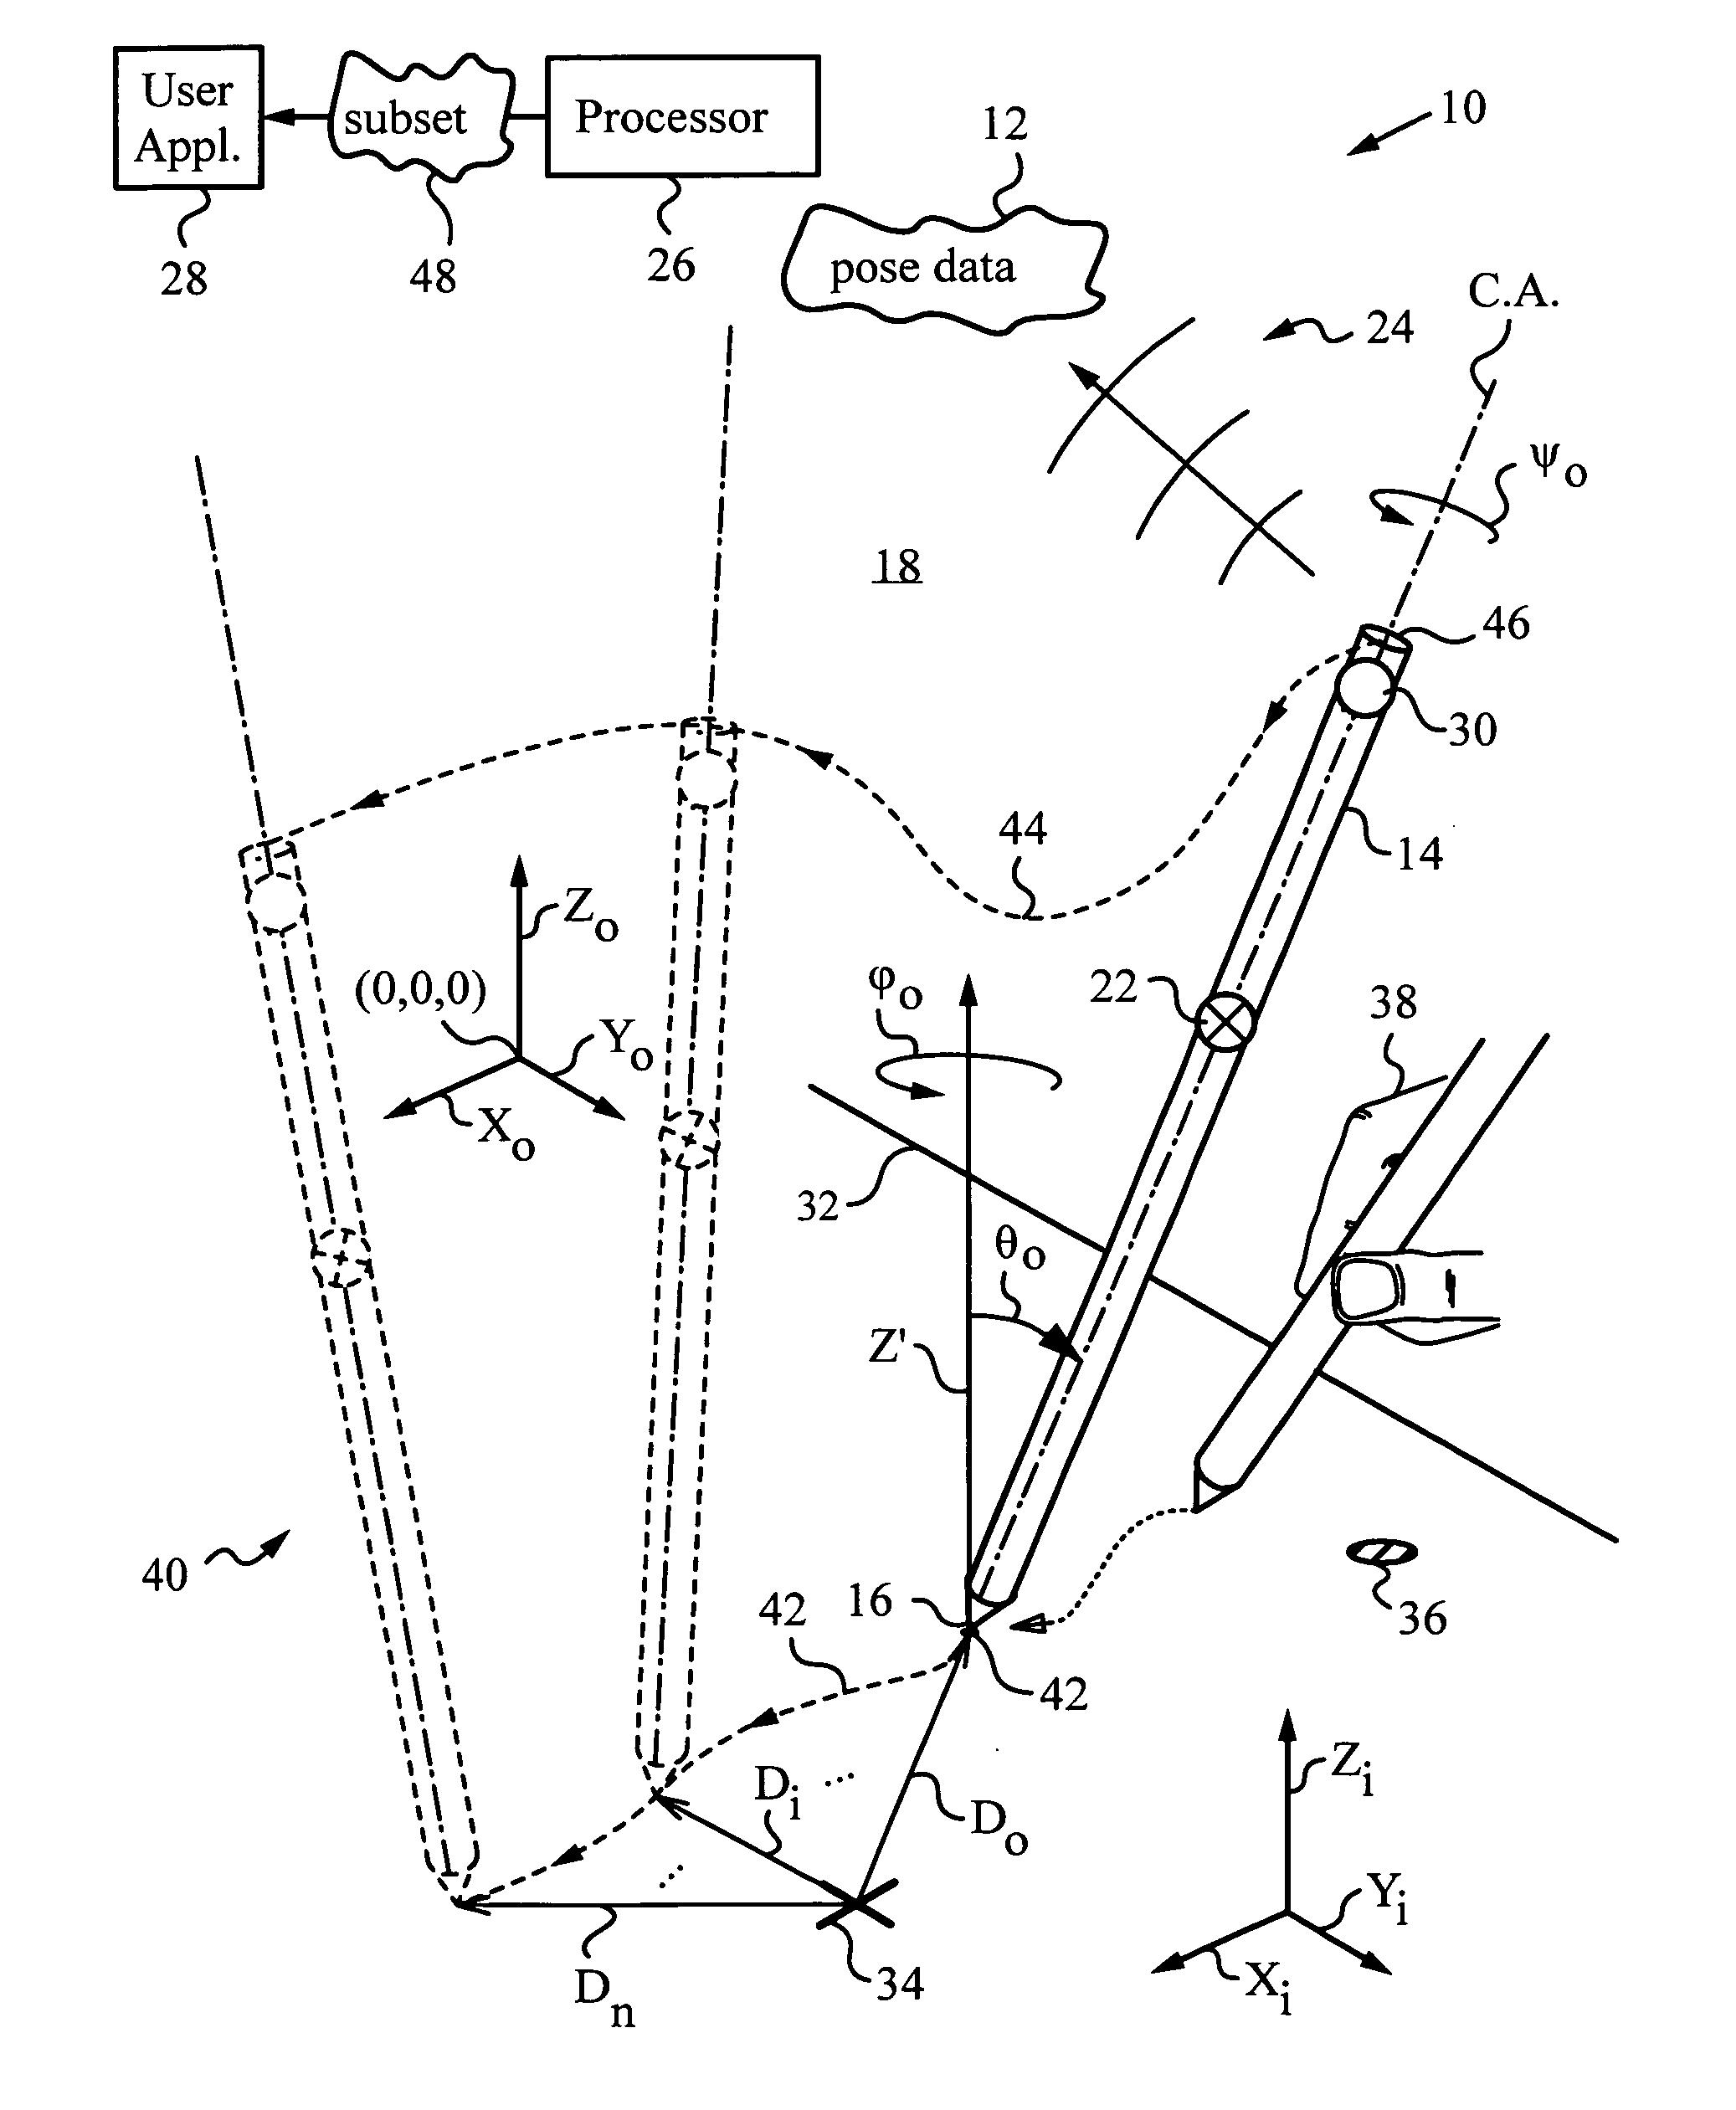 Apparatus and method for determining an absolute pose of a manipulated object in a real three-dimensional environment with invariant features